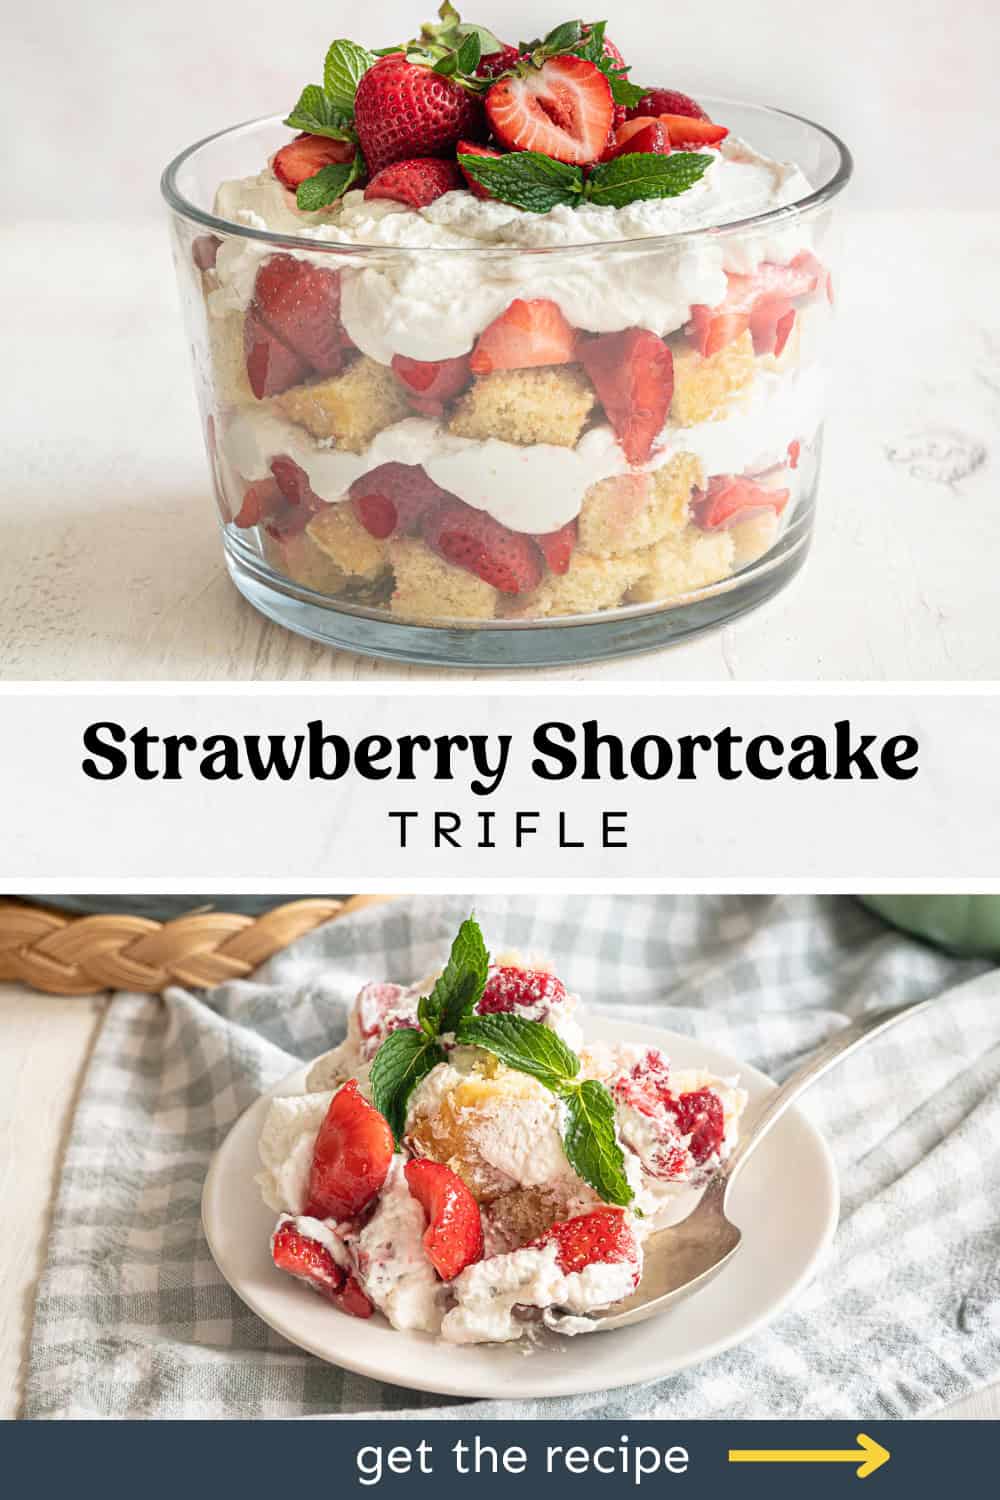 Strawberry shortcake trifle on top and a serving of it on the bottom of the image.